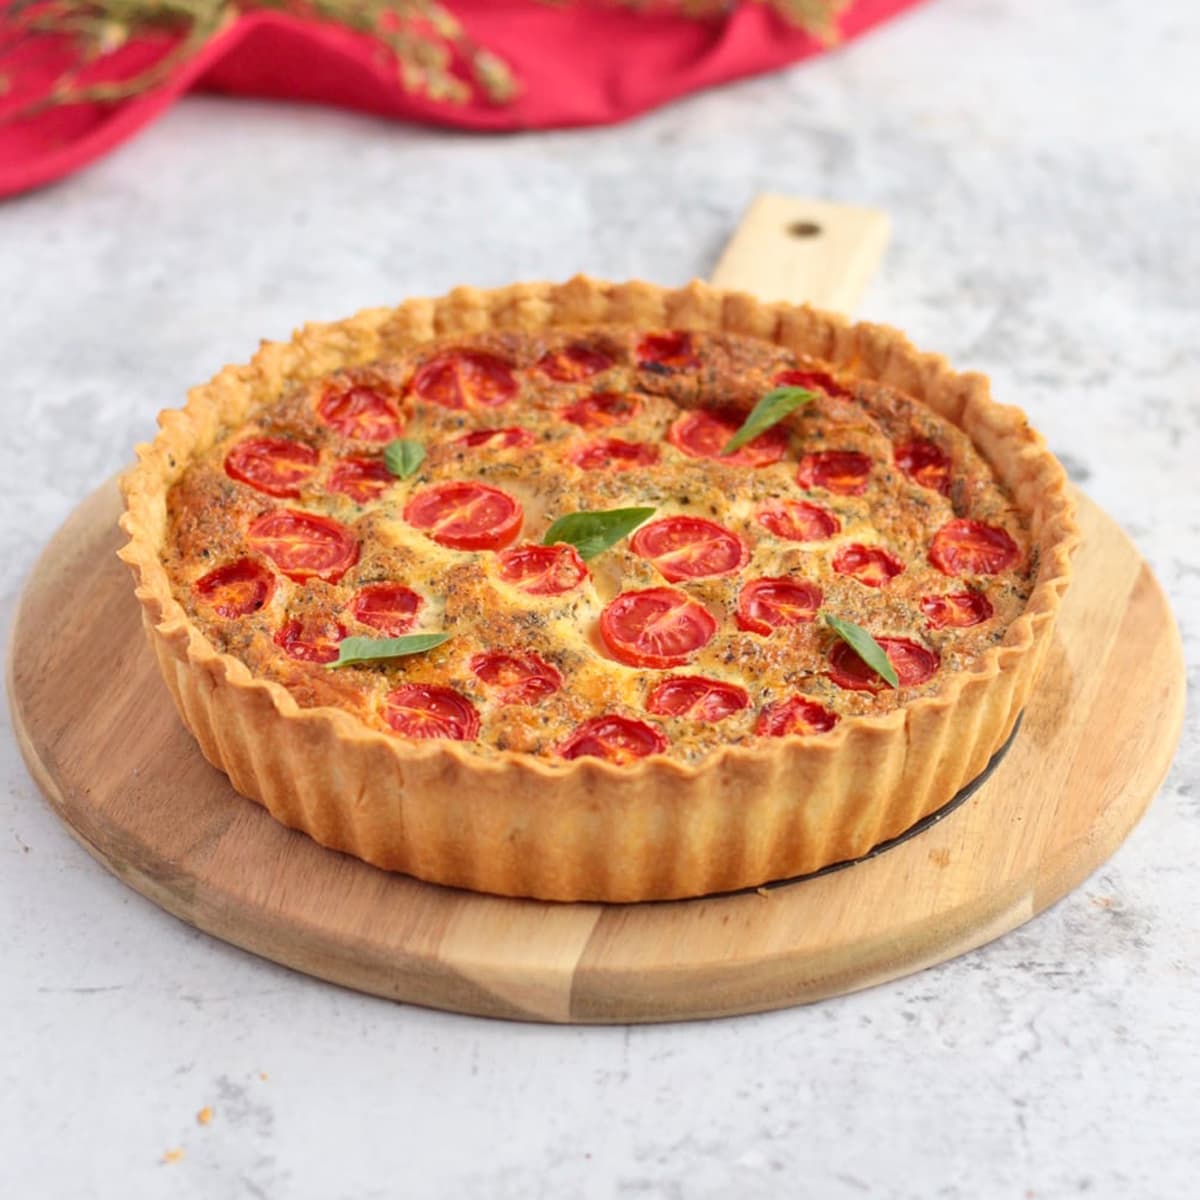 Cheese Quiche with Tomato on a serving board